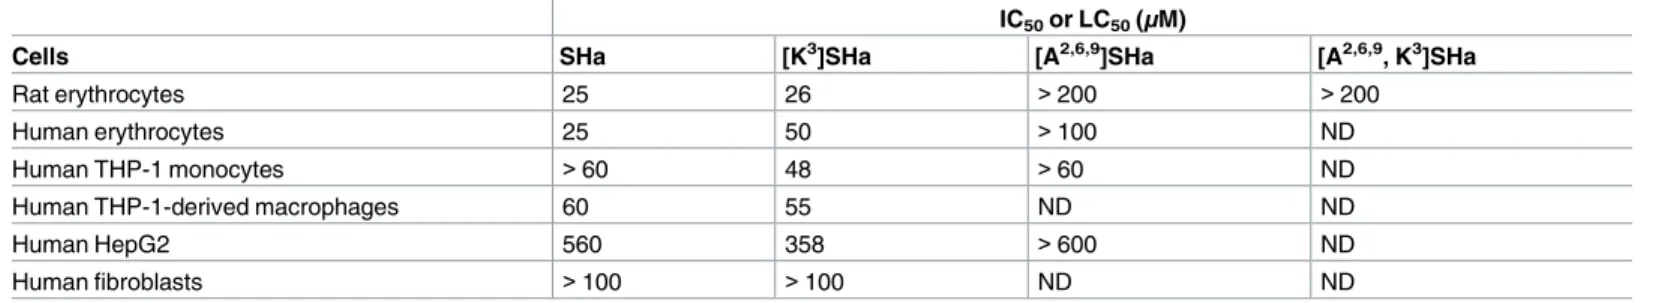 Table 5. Cytotoxic activity of temporins SHa and analogs against human cells and rat erythrocytes.